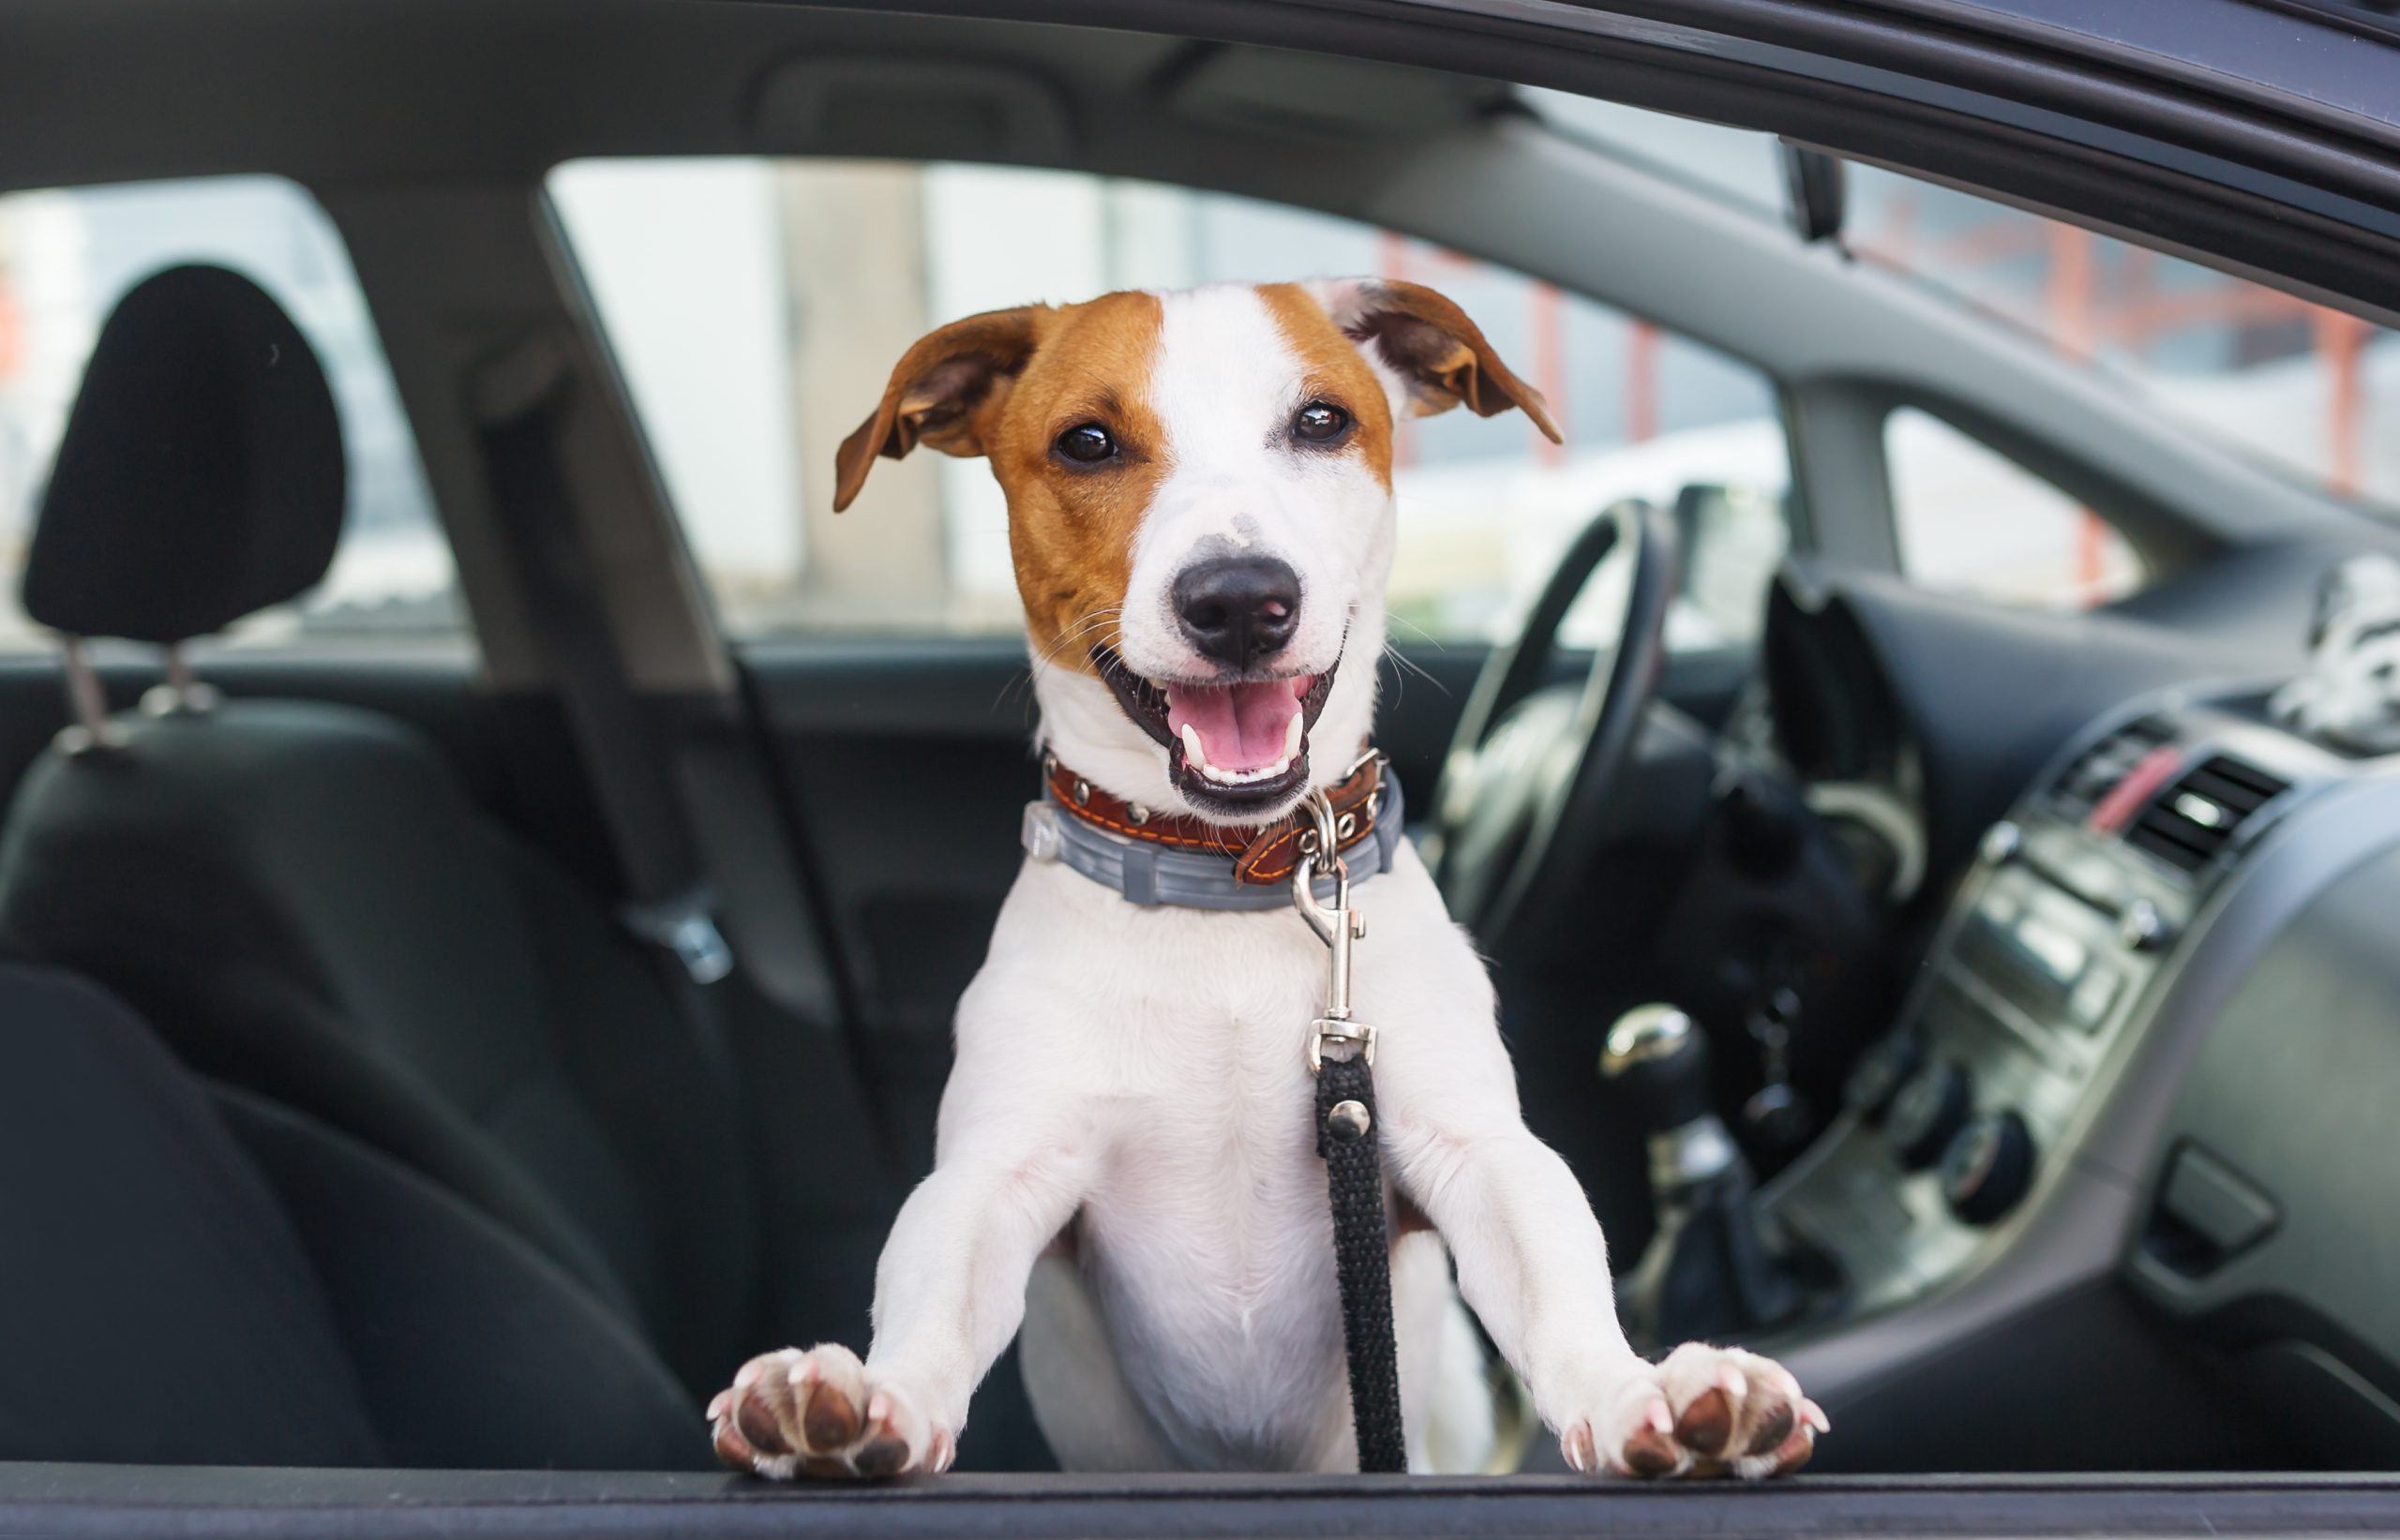 The Dangers of Leaving your Pet in a Hot Car